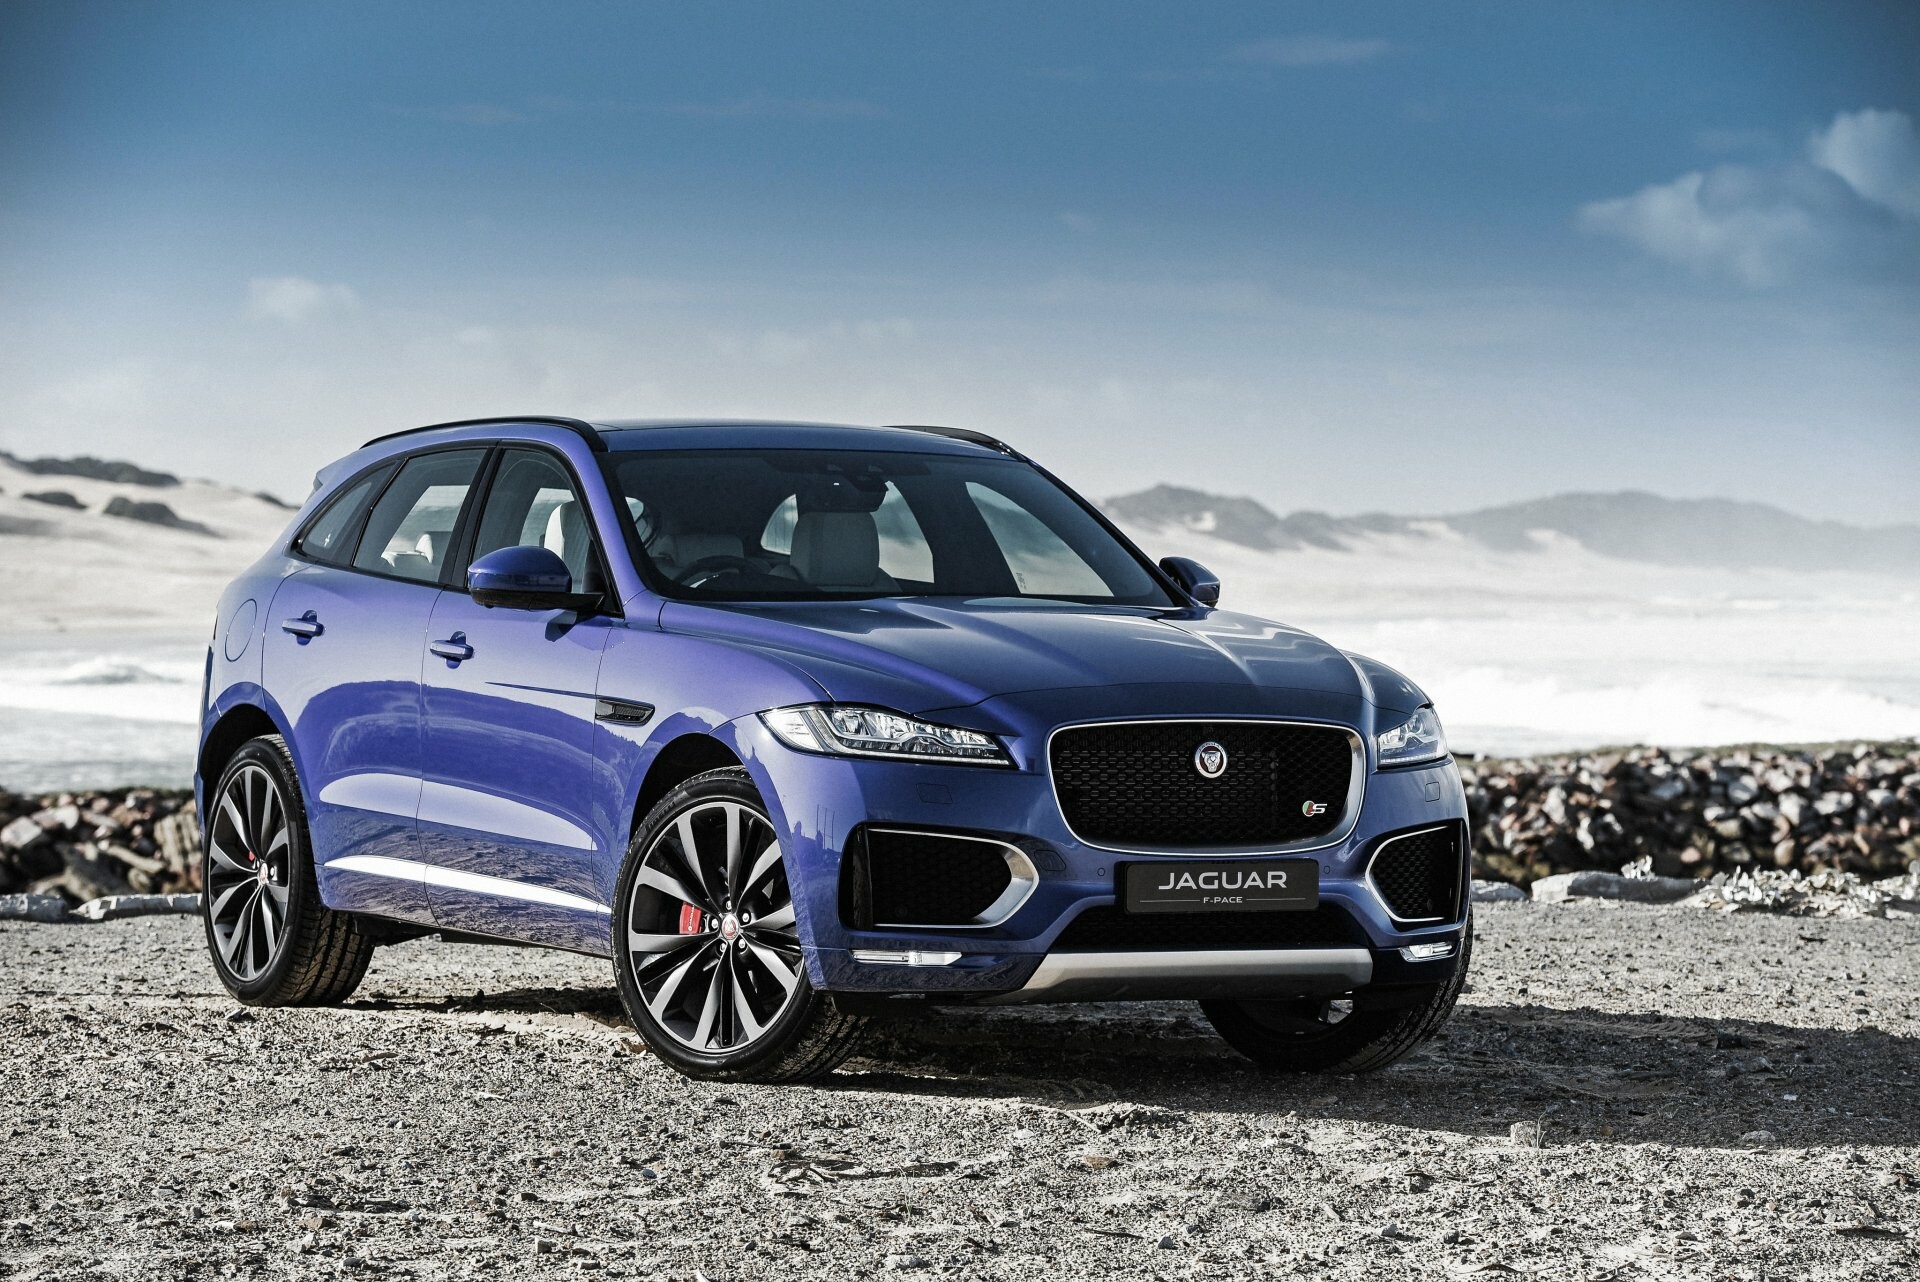 Jaguar Cars: F-Pace, A compact luxury crossover SUV made by JLR. 1920x1290 HD Wallpaper.